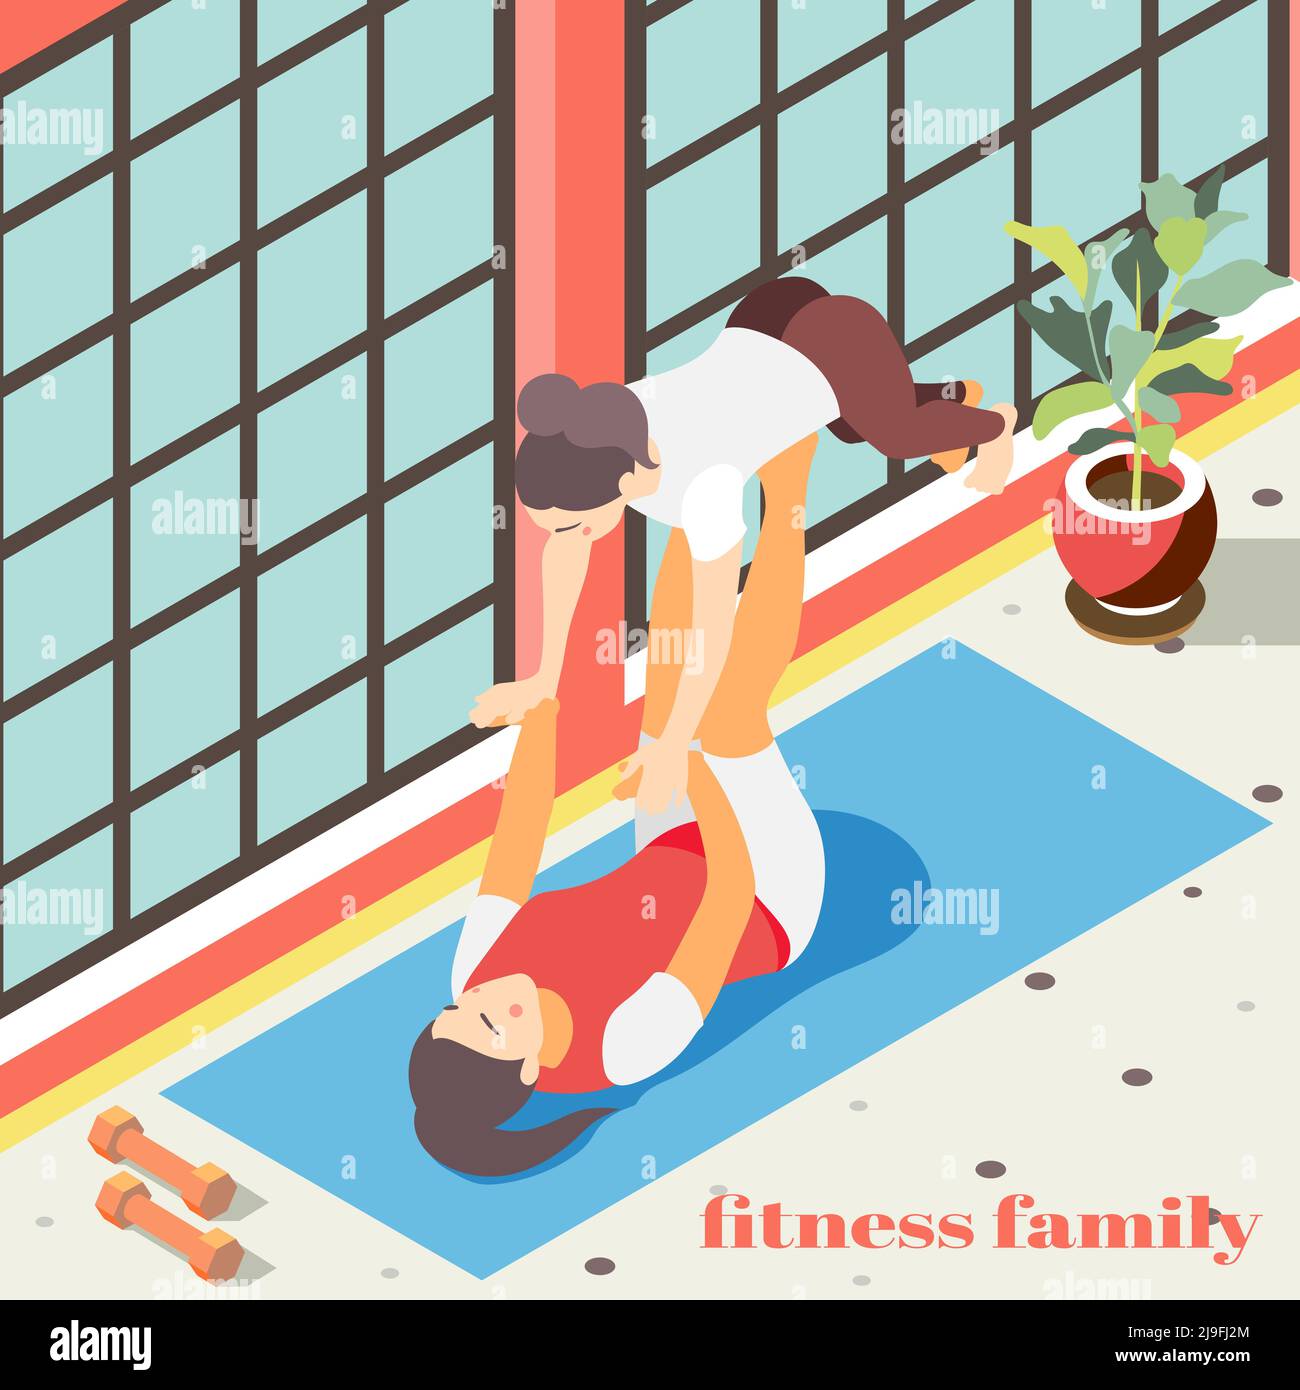 $Fitness In Gym Isometric Background Stock Vector